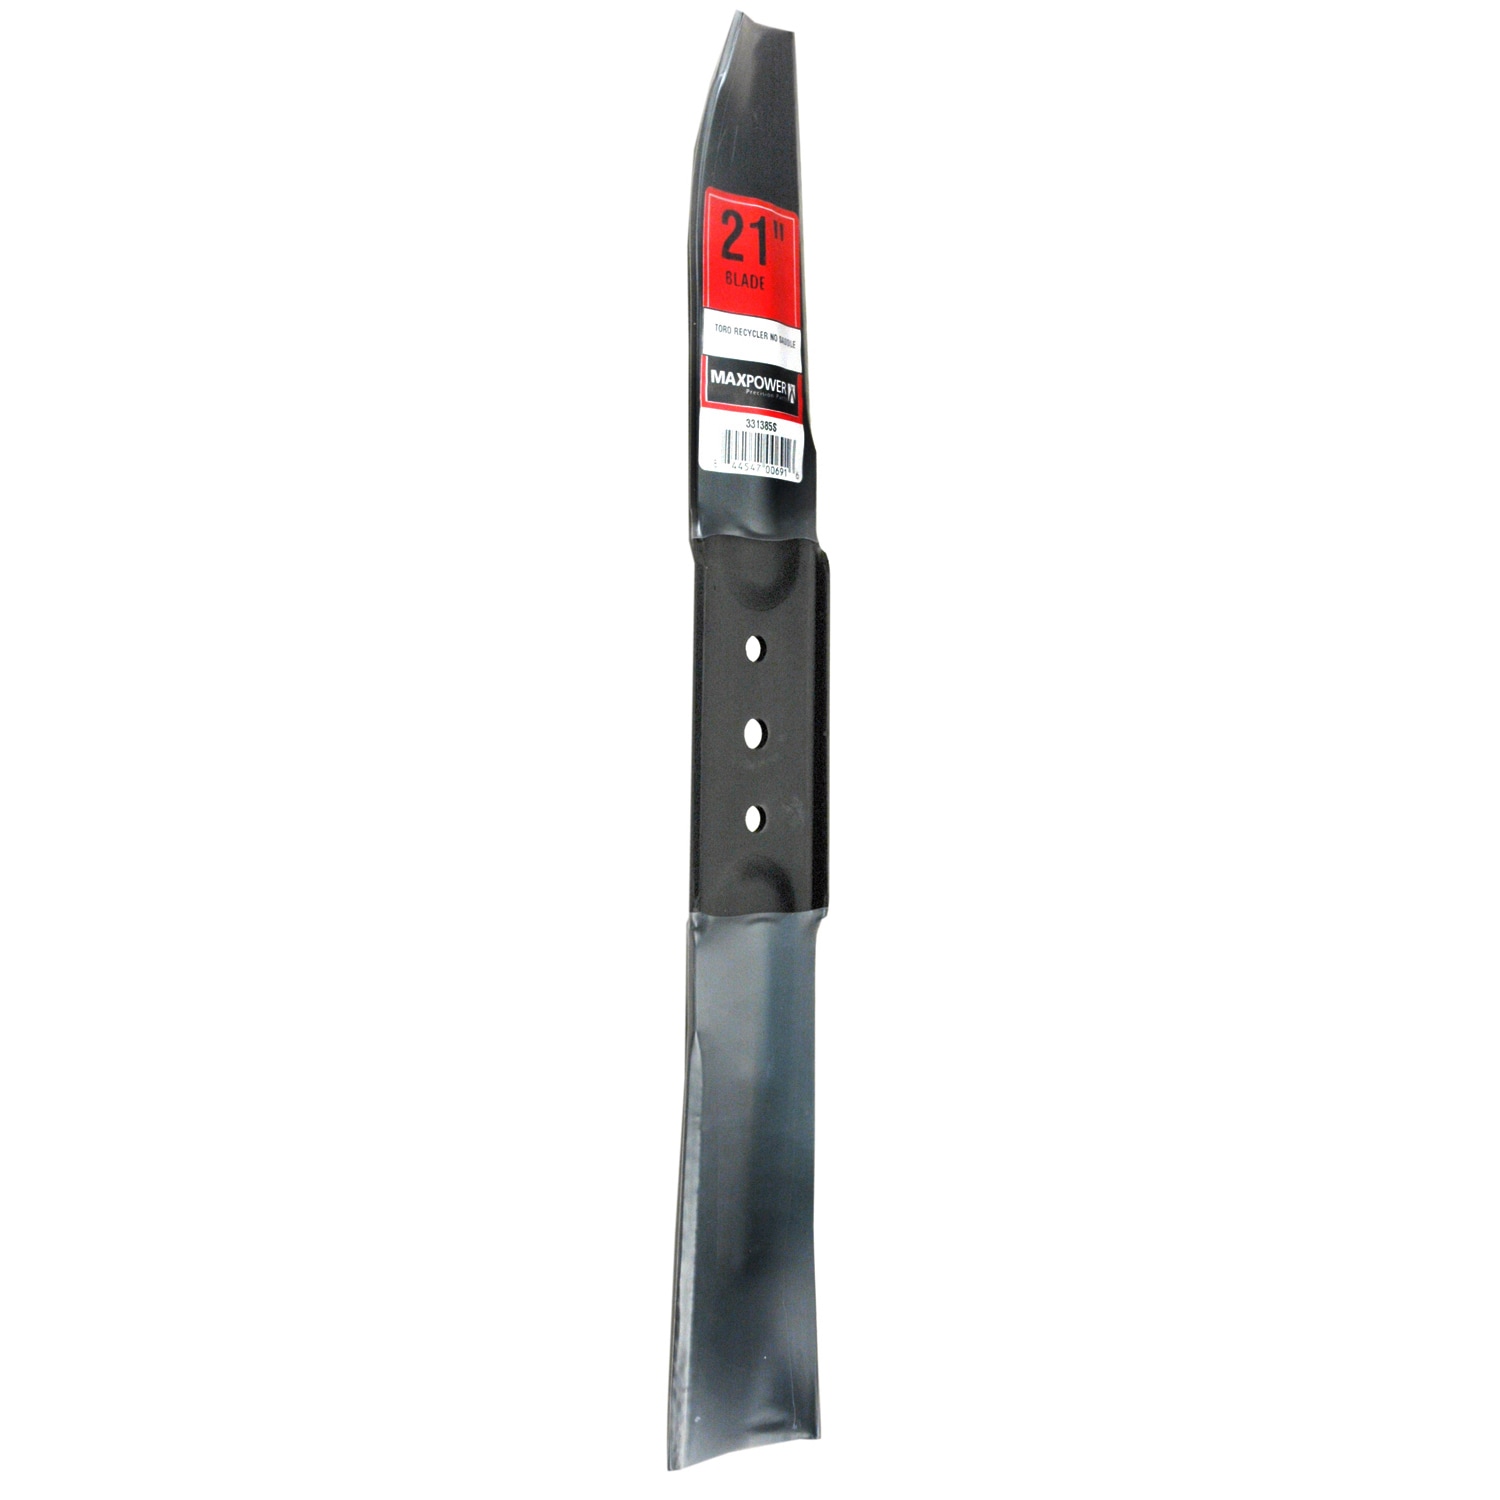 Maxpower 331385S 21 inch Toro Mower Blade Without Saddle - Bed Bath &  Beyond - 12412486